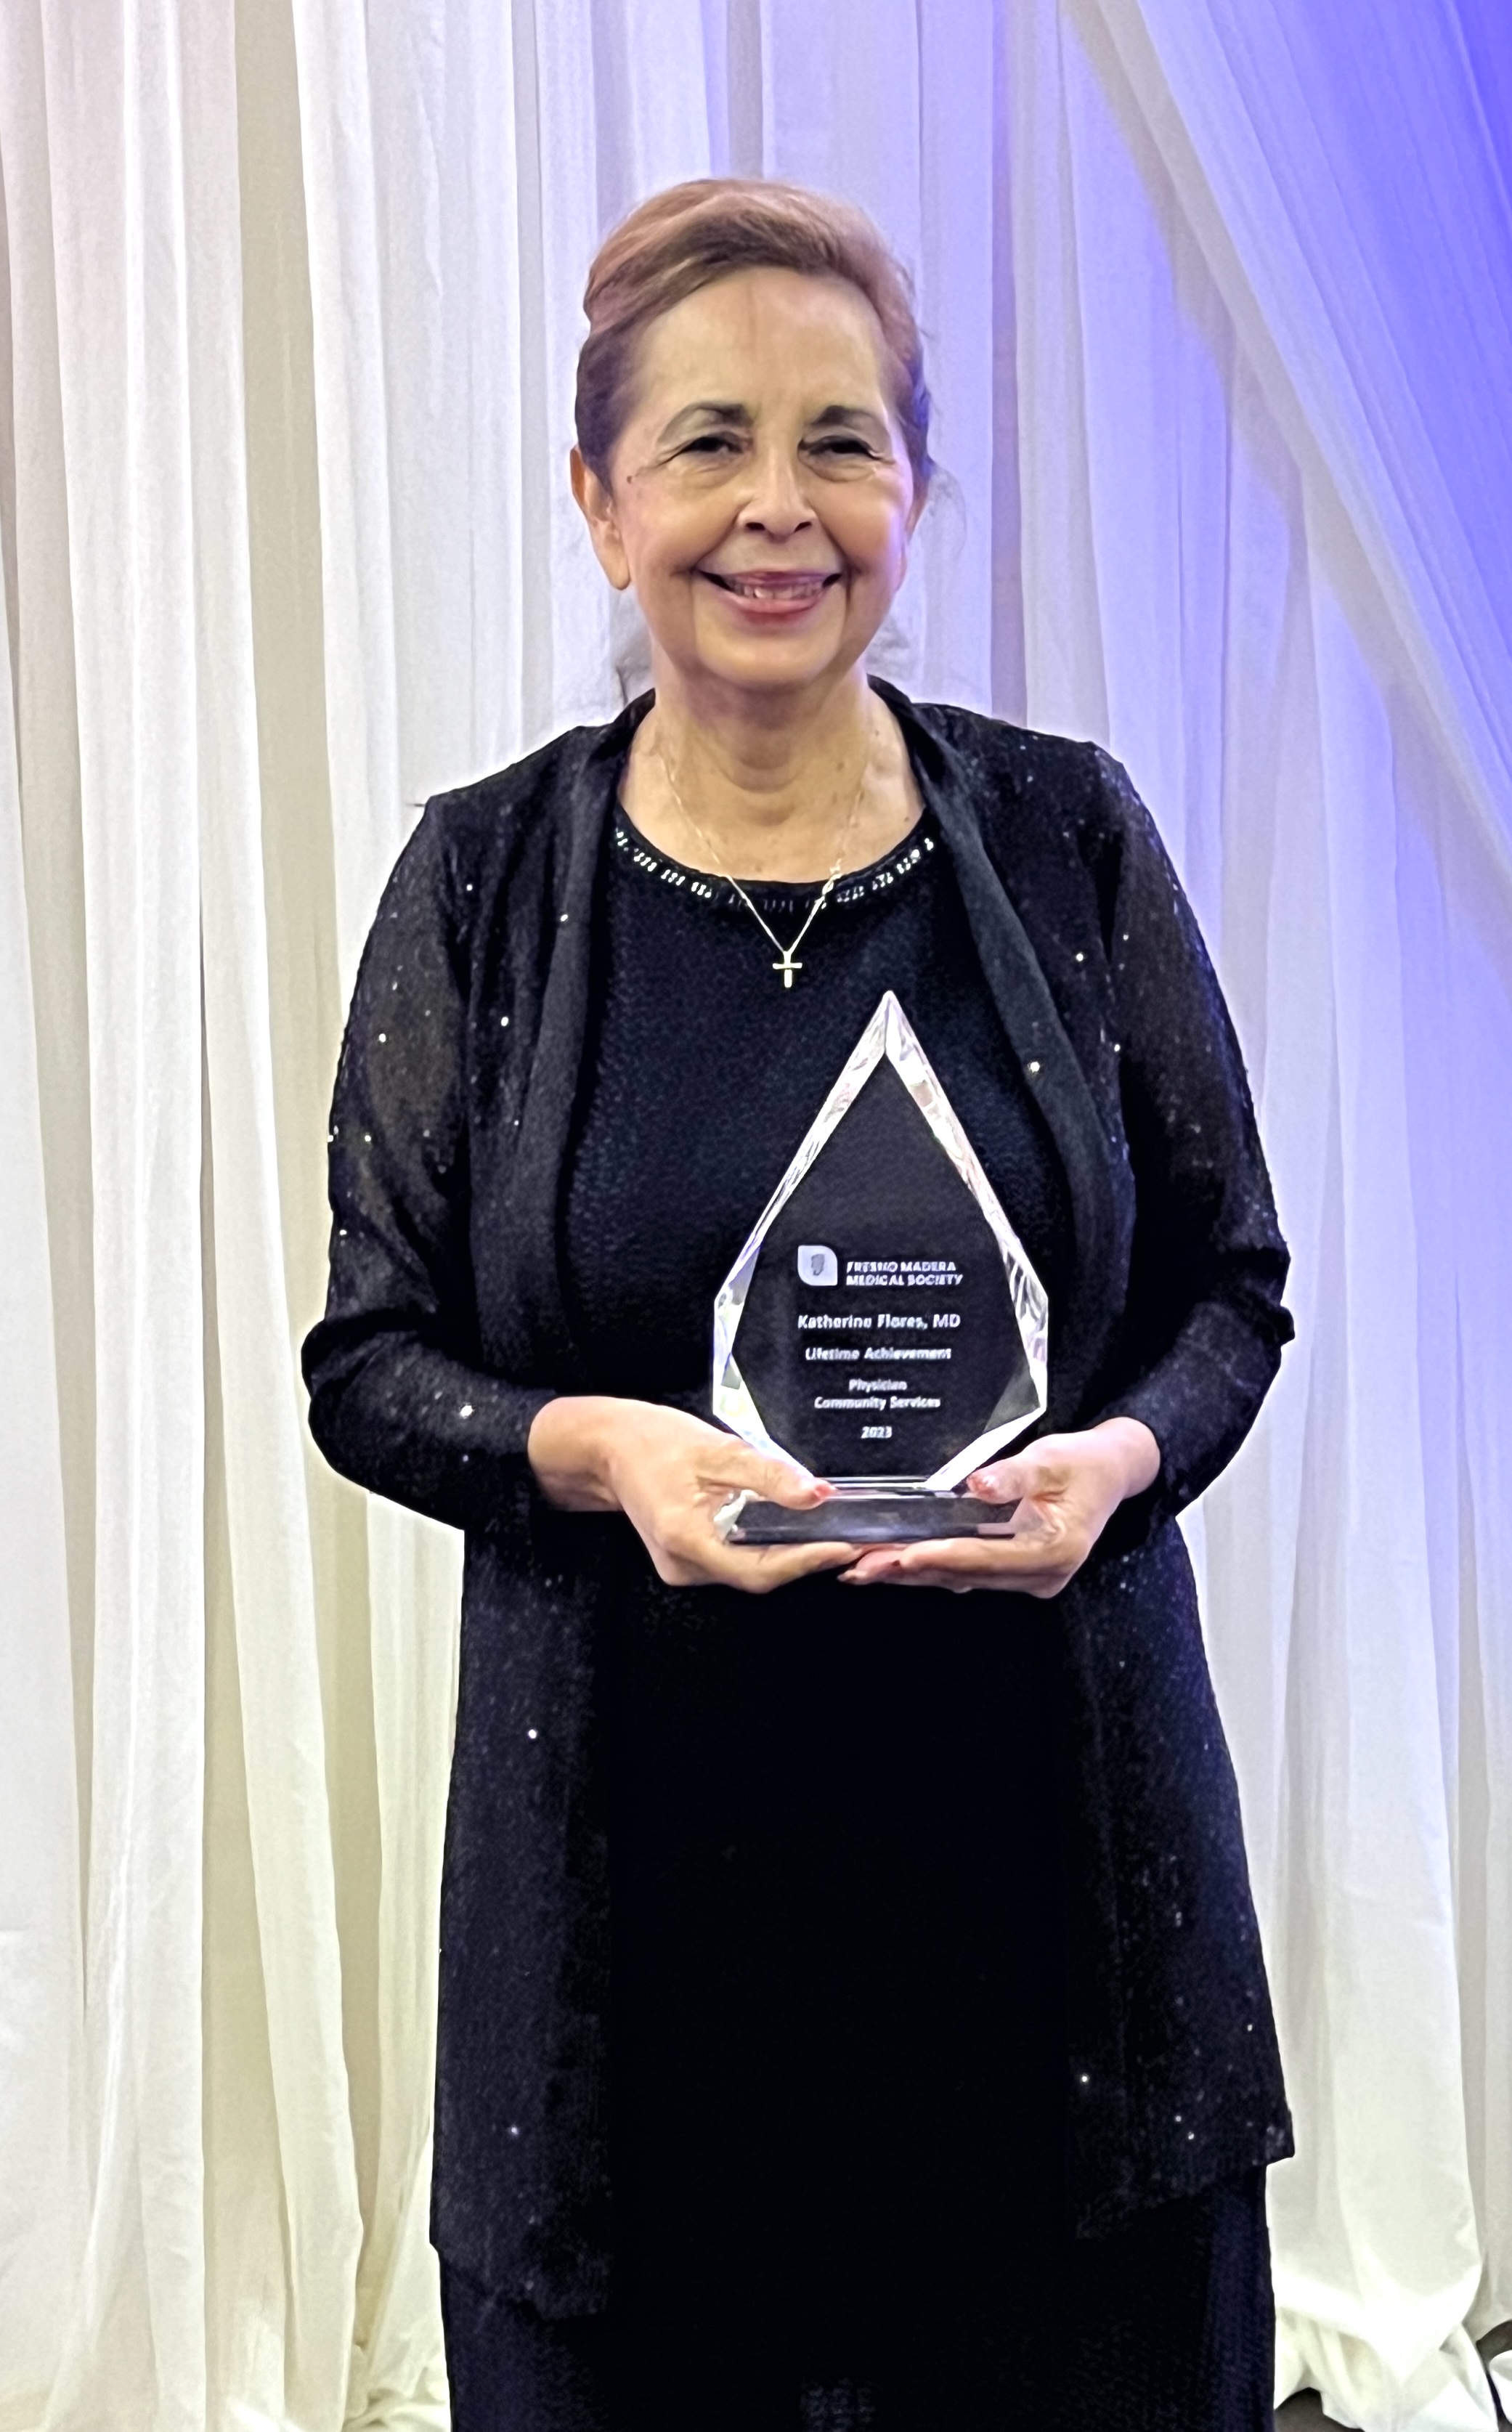 Dr. Katherine Flroes posing with an award